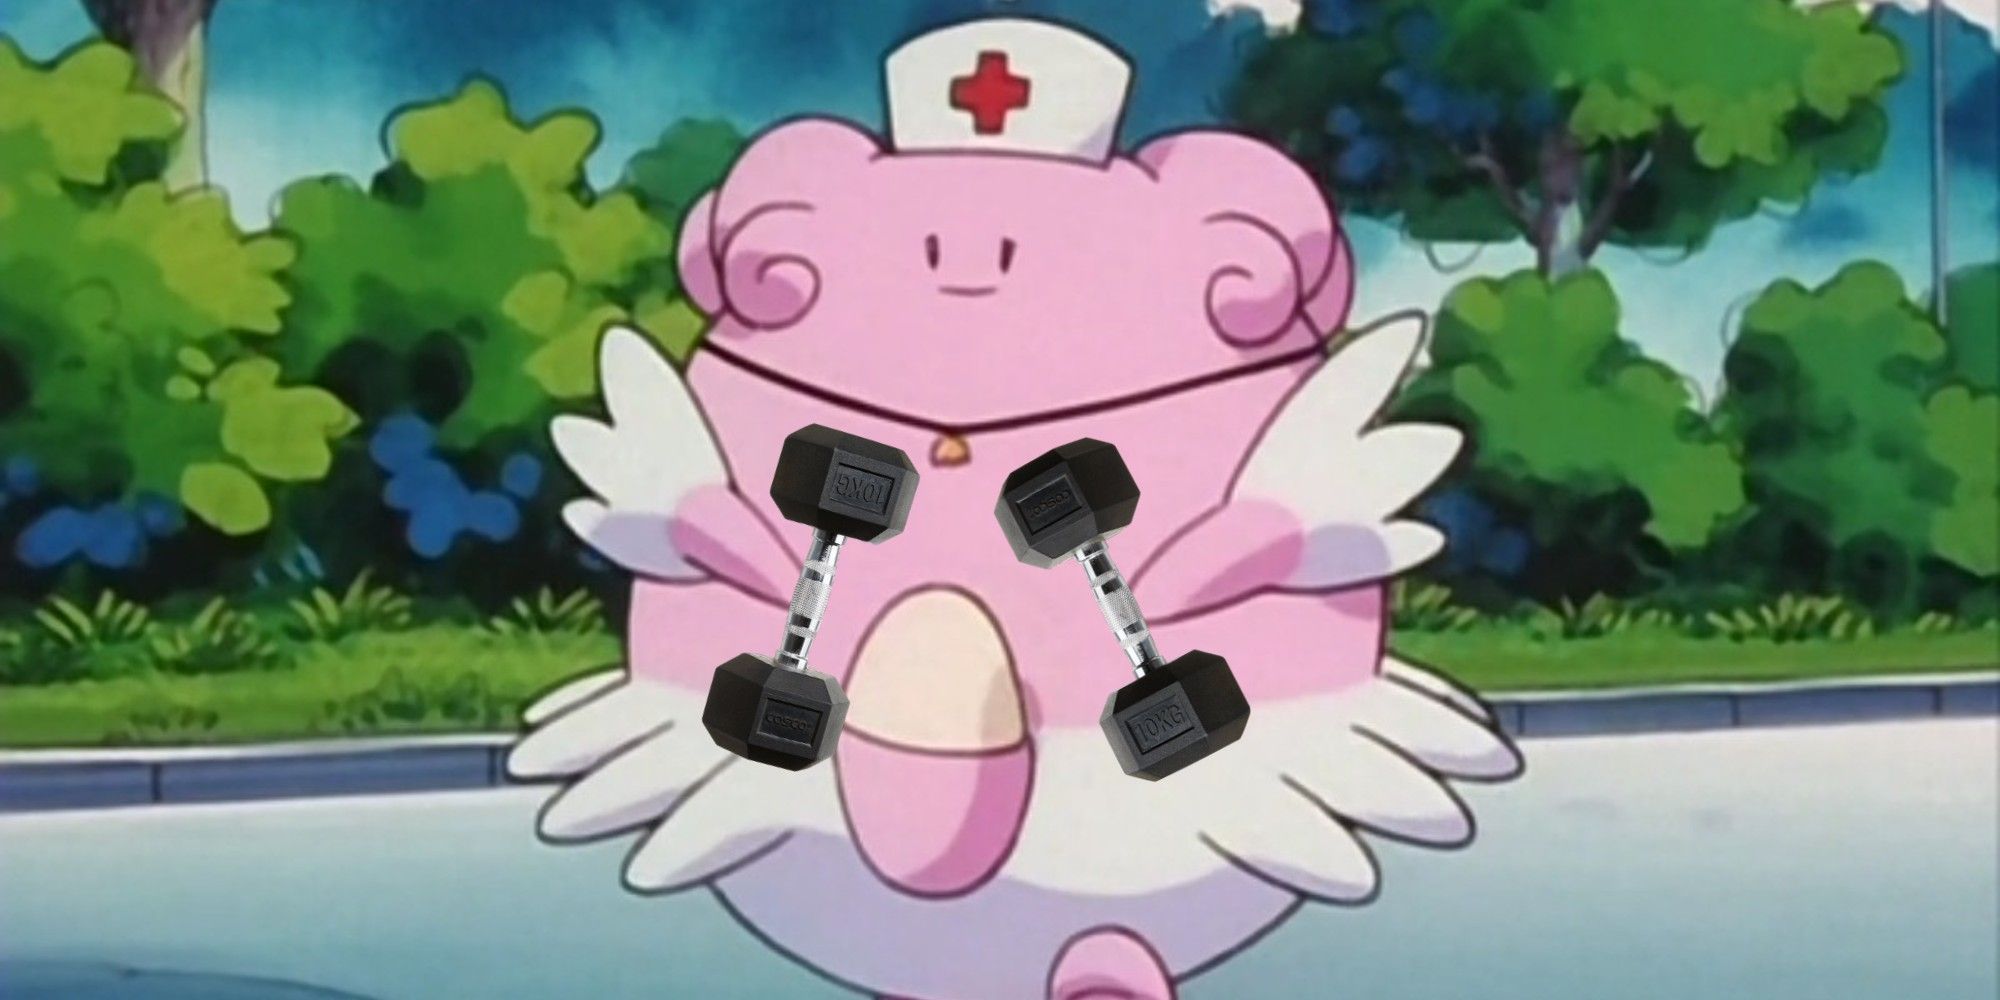 This Week In Pokemon Unite Blissey Buffed Too Many Slowbros And More